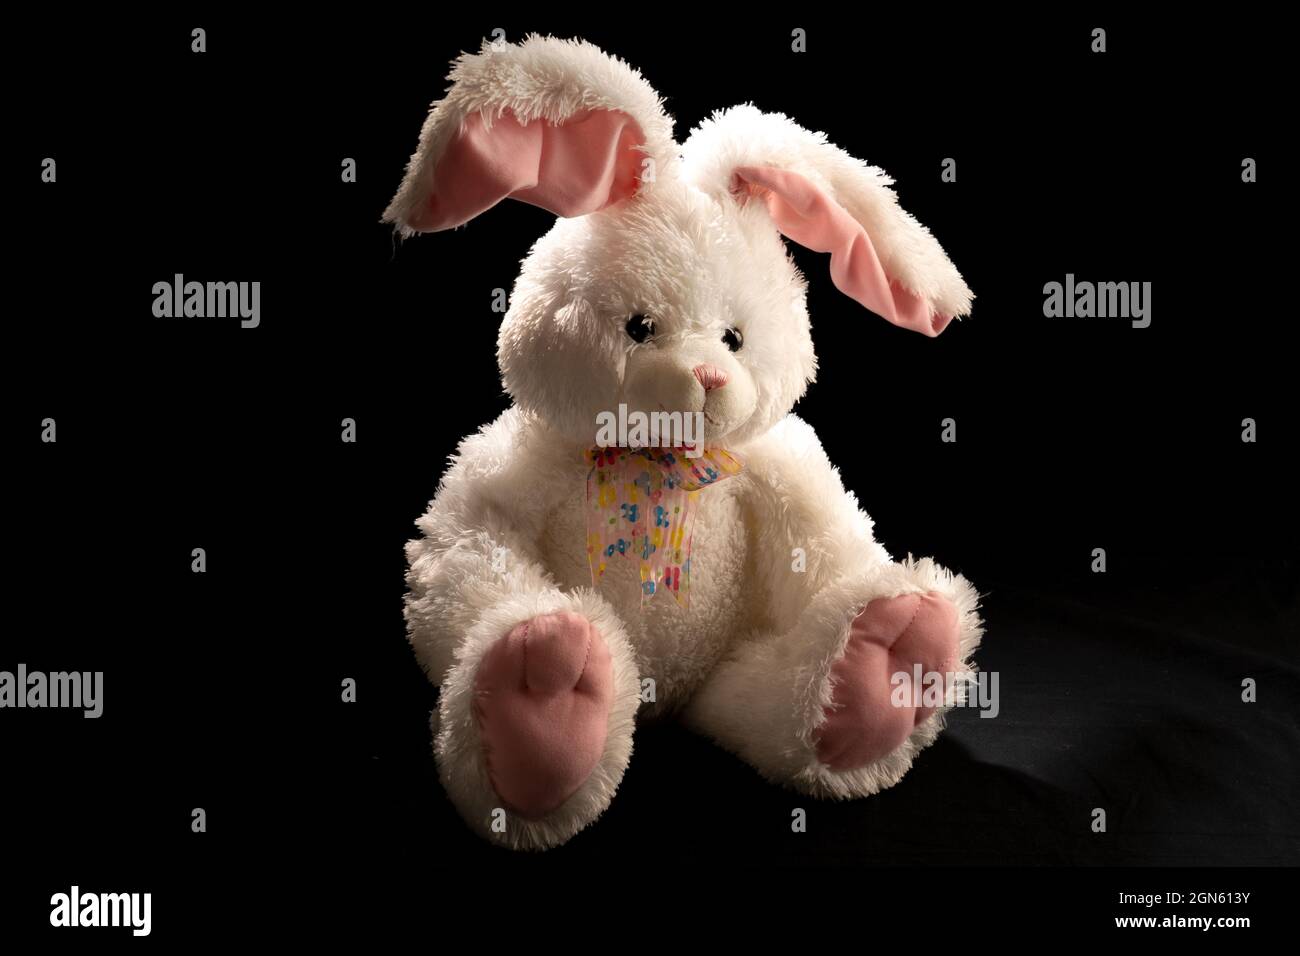 Low key lighting of a stuffed rabbit with lop-sided ears Stock Photo